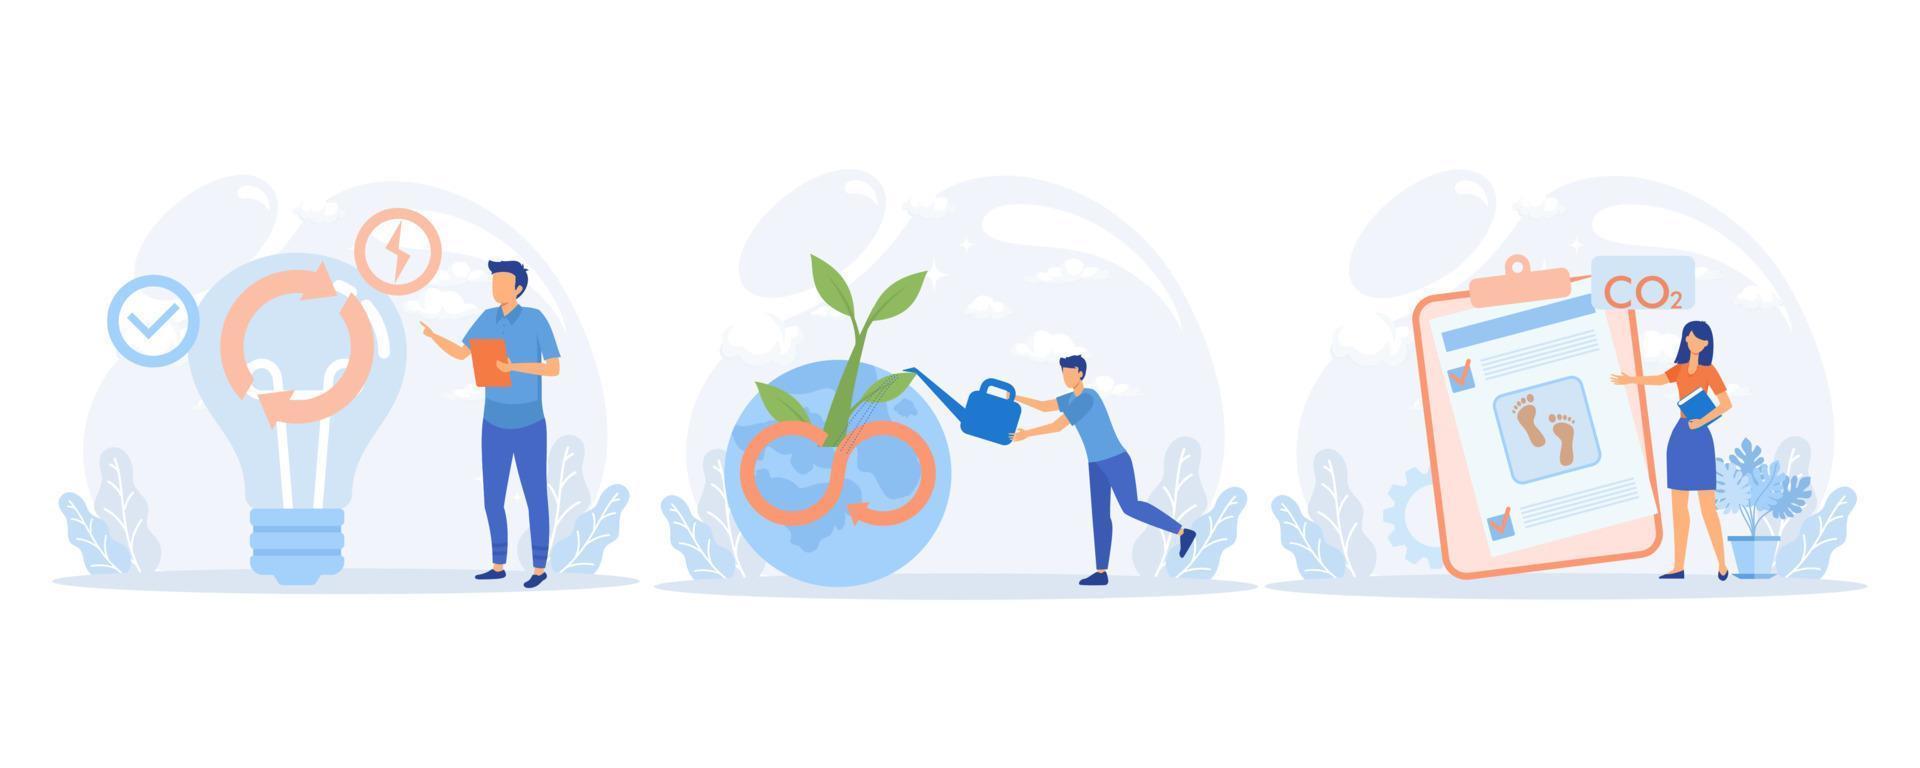 Circular economy illustration. Sustainable economic growth, recourses reuse and reduce co2 emission and climate impact. ESG, green energy and industry concept. flat vector modern illustration